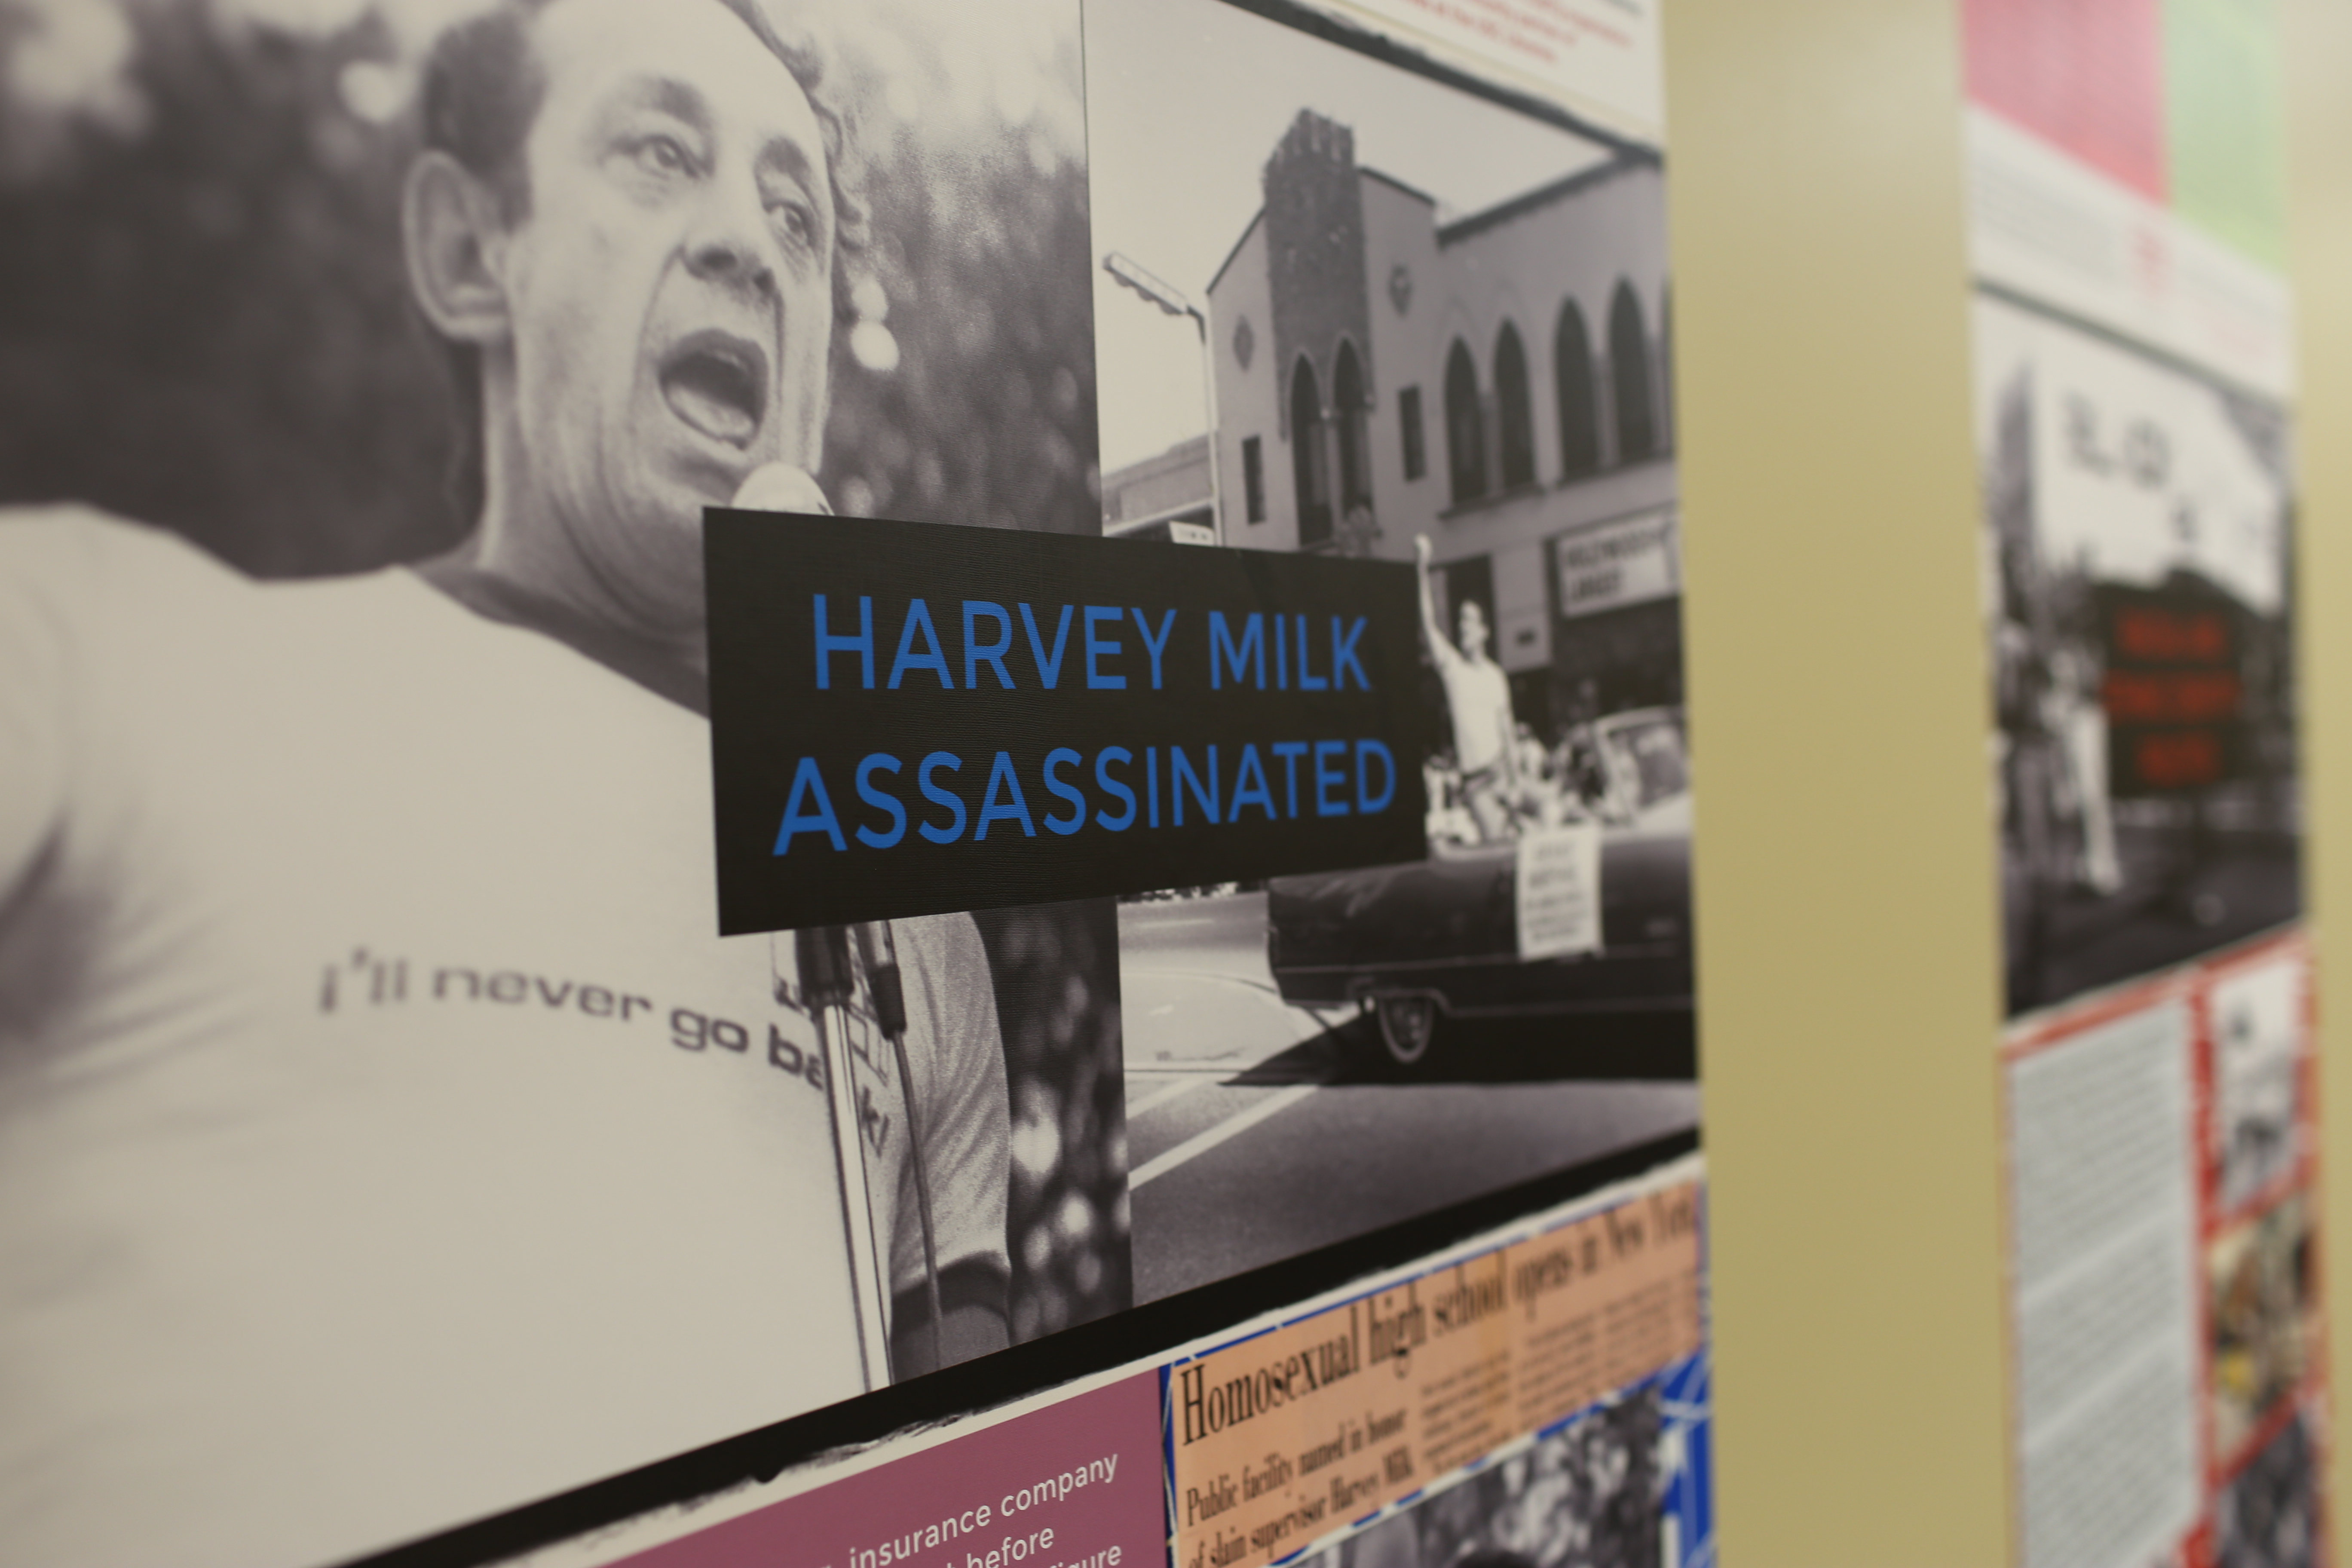 Closeup of the "Harvey Milk Assassinated" poster from The History of the LGBTQ Civil rights Movement exhibit.